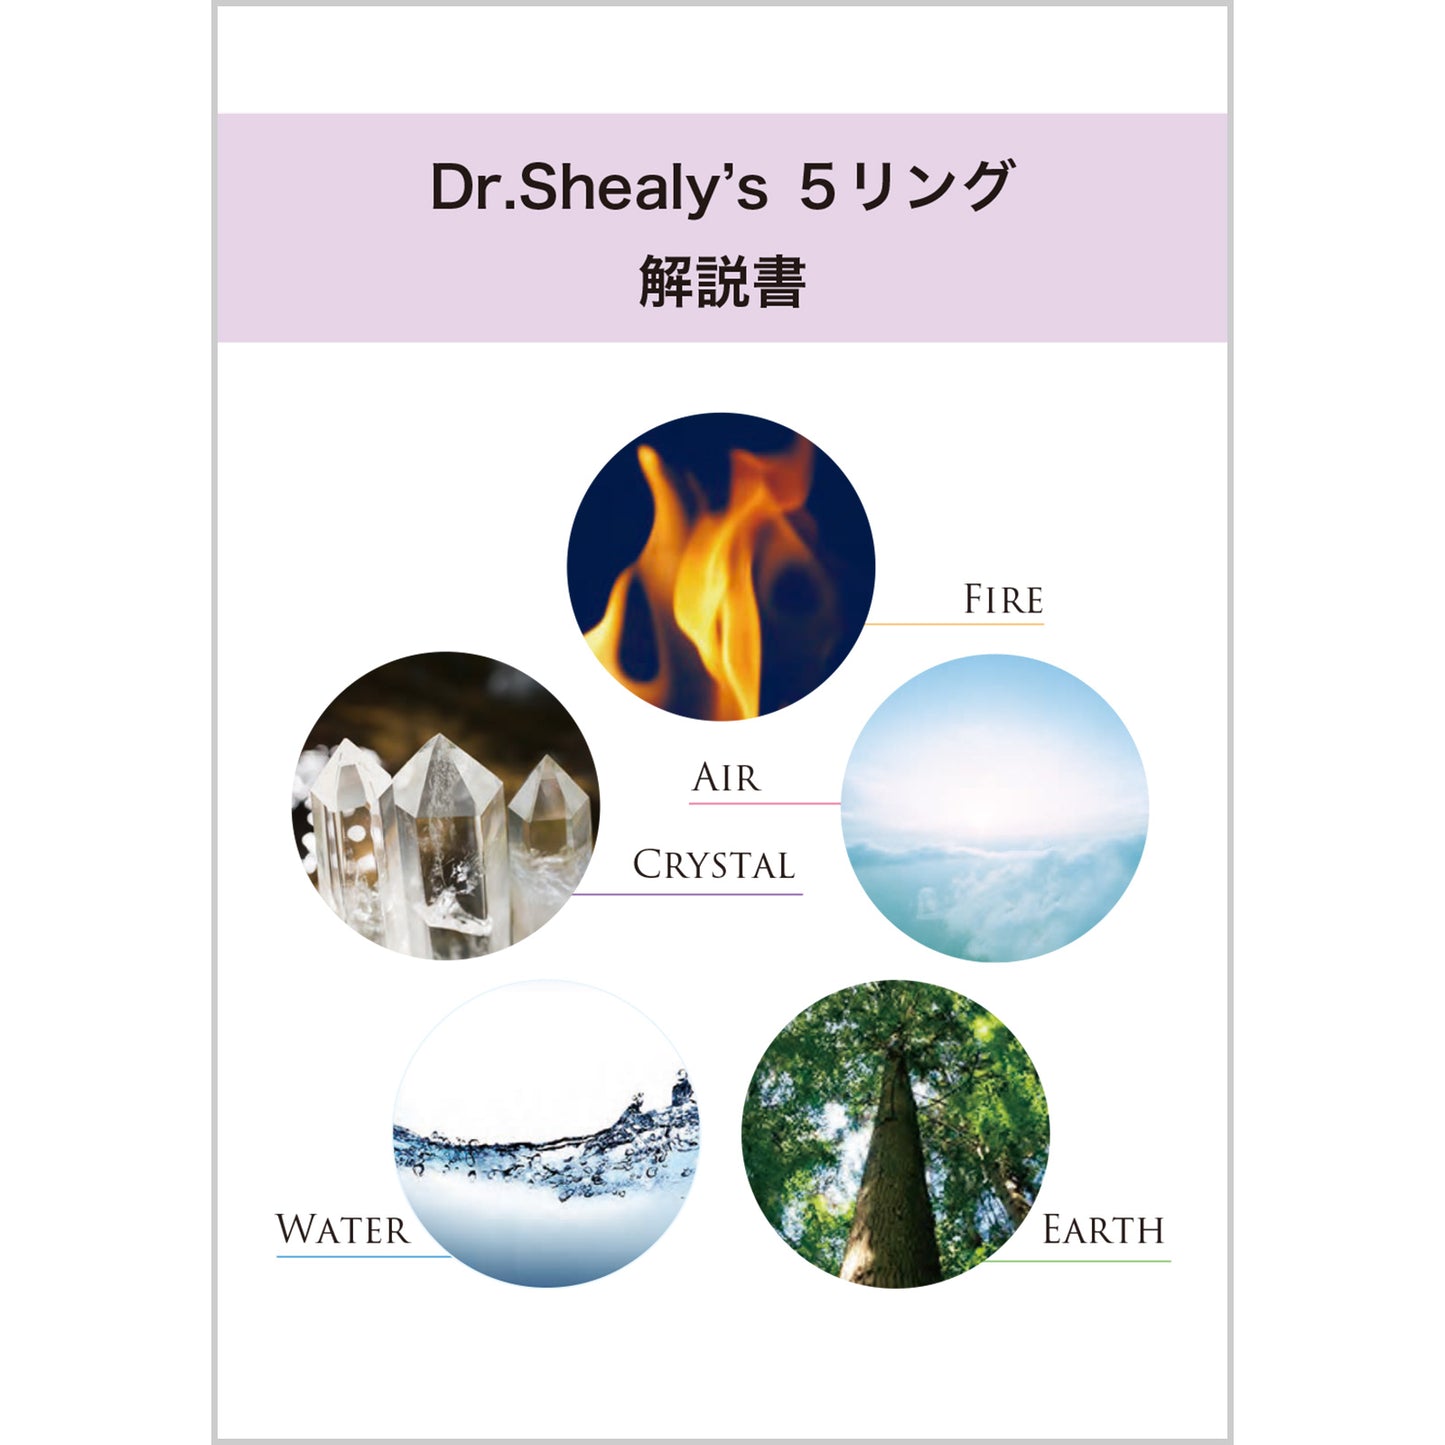 Dr. Shealy’s 5 Rings Oil 初回セット